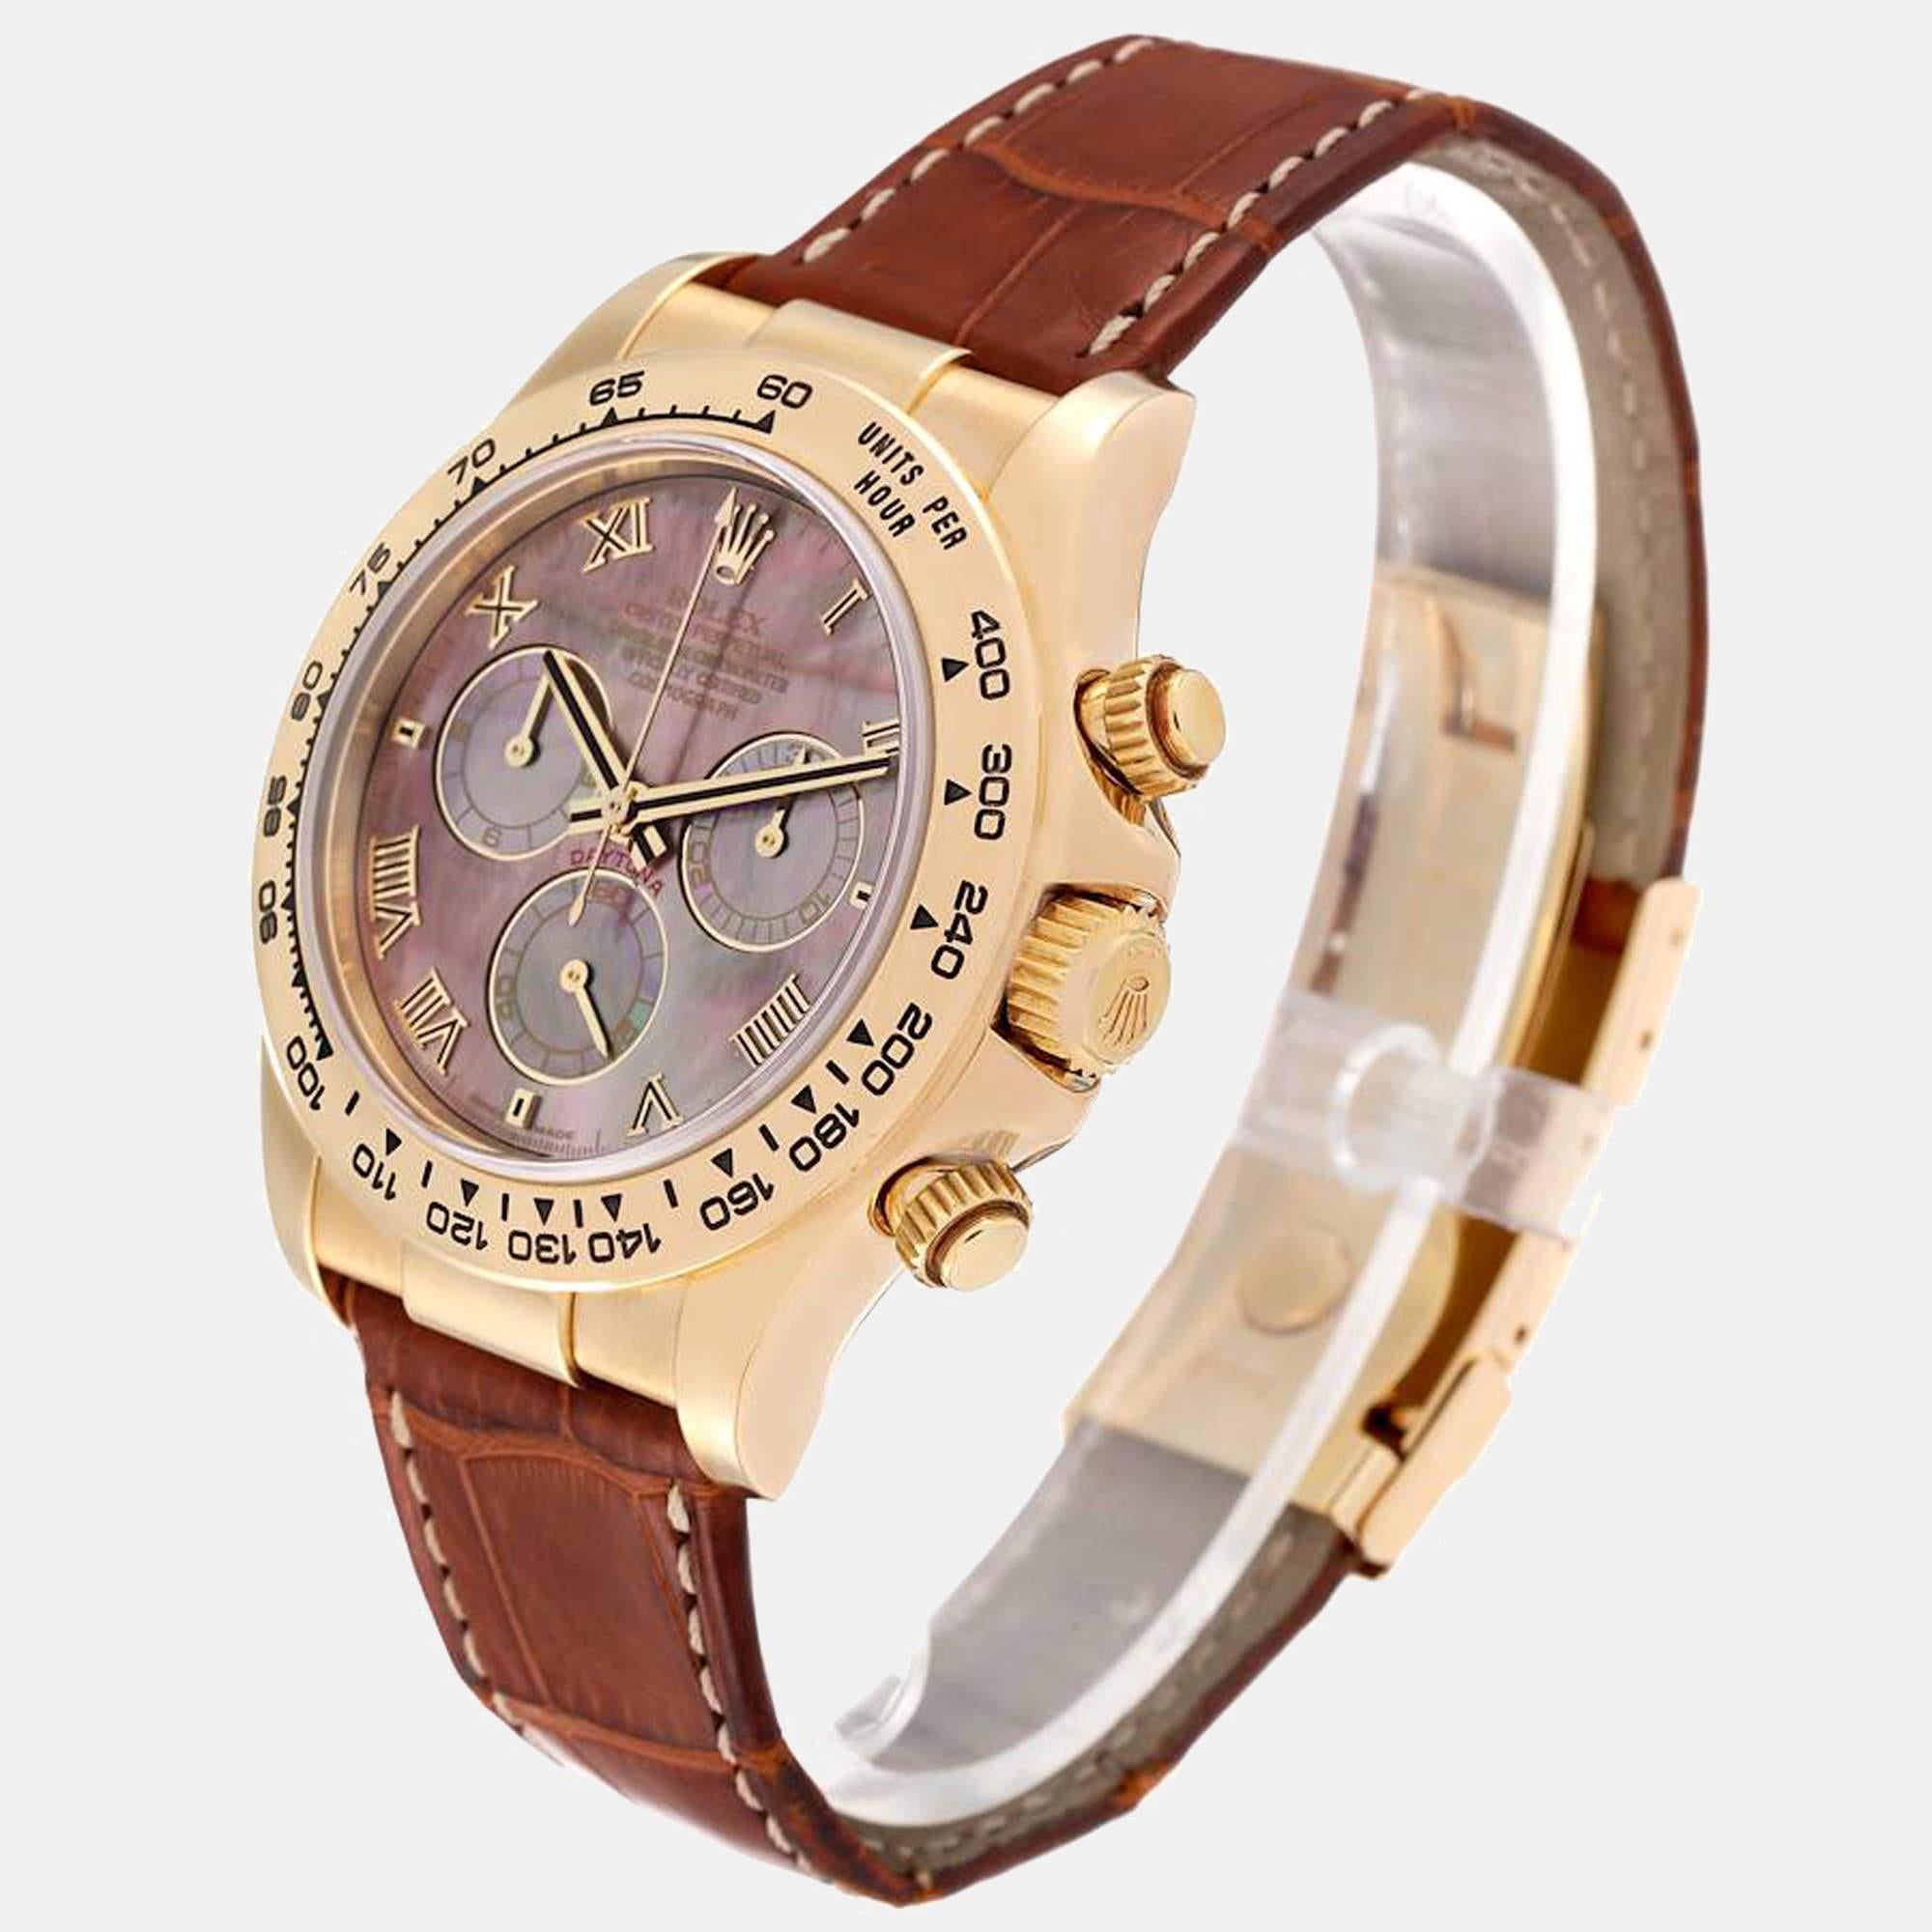 A luxury watch you will love having in your collection is this one from Rolex. Celebrated for its classy style details, innovation, and luxe factor, Rolex delivers some of the most coveted watches in the world. You'll enjoy wearing this one.

